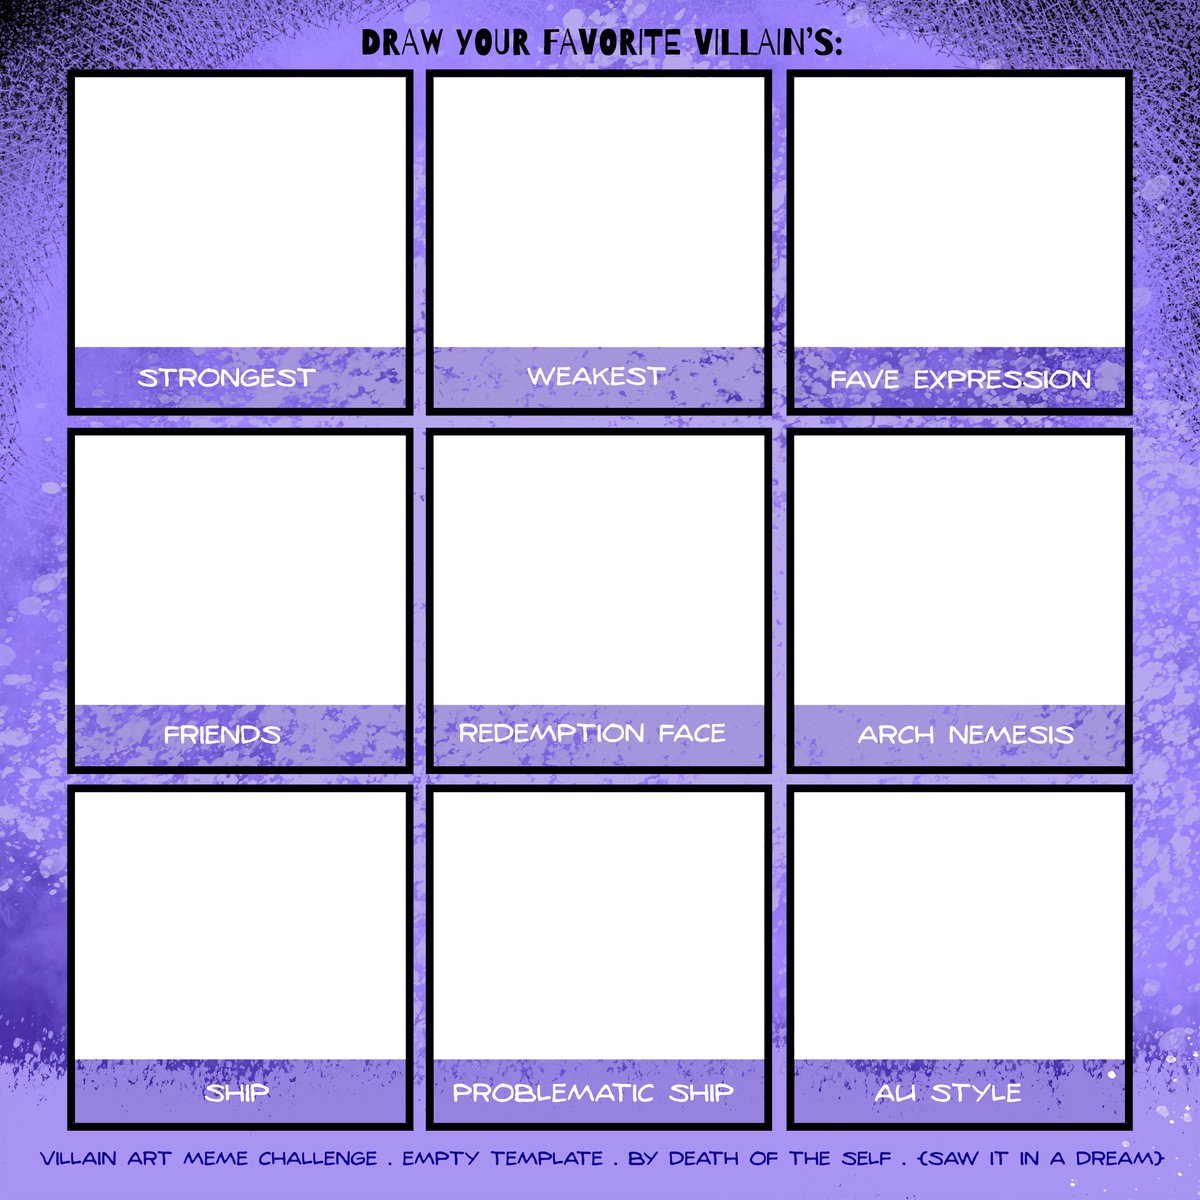 Draw your fave villain! Villain art meme empty template challenge! Had a dream about it, now imma fill it up and so should you xx